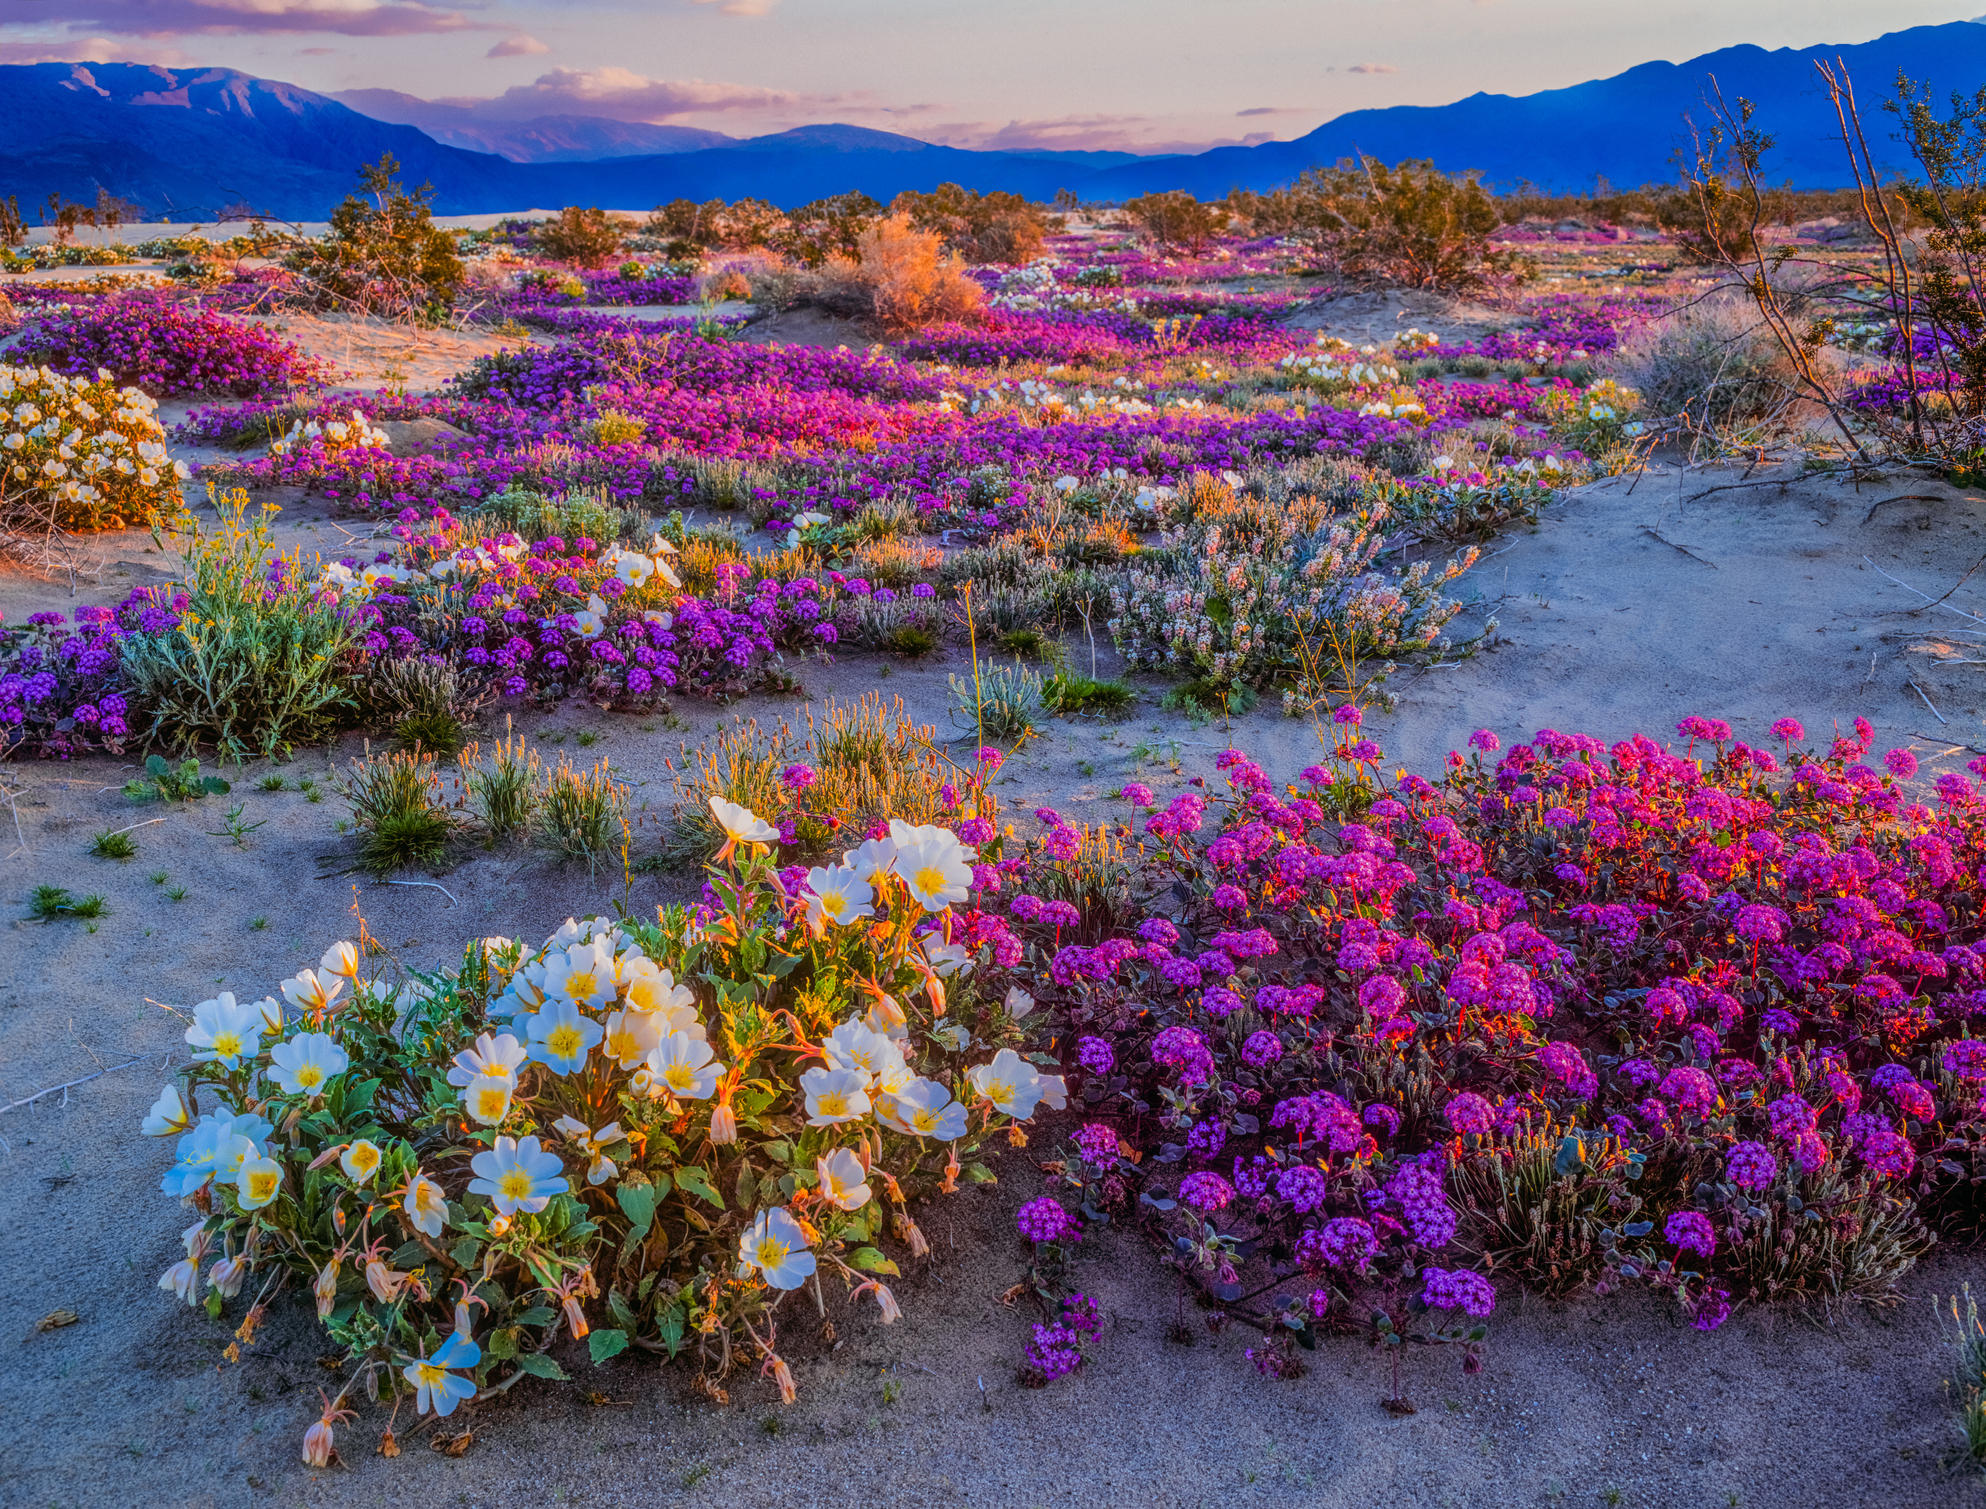 Wild Flower Super Bloom makes for a Super Scattering location A